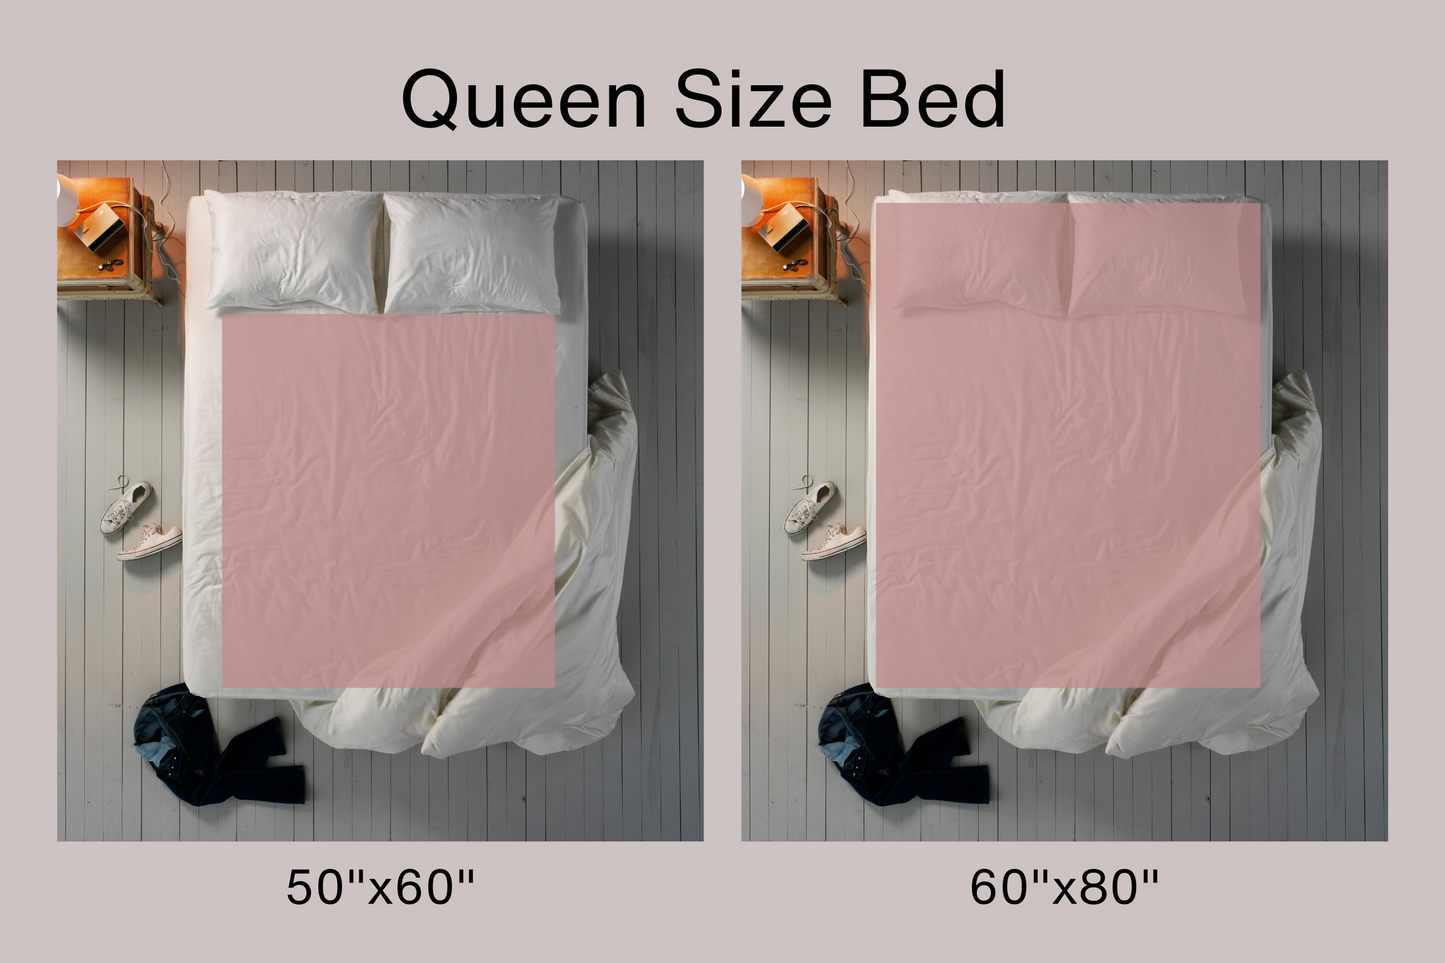 soft velveteen blanket - sizes 50x60 inches and 60x80 inches queen size bed